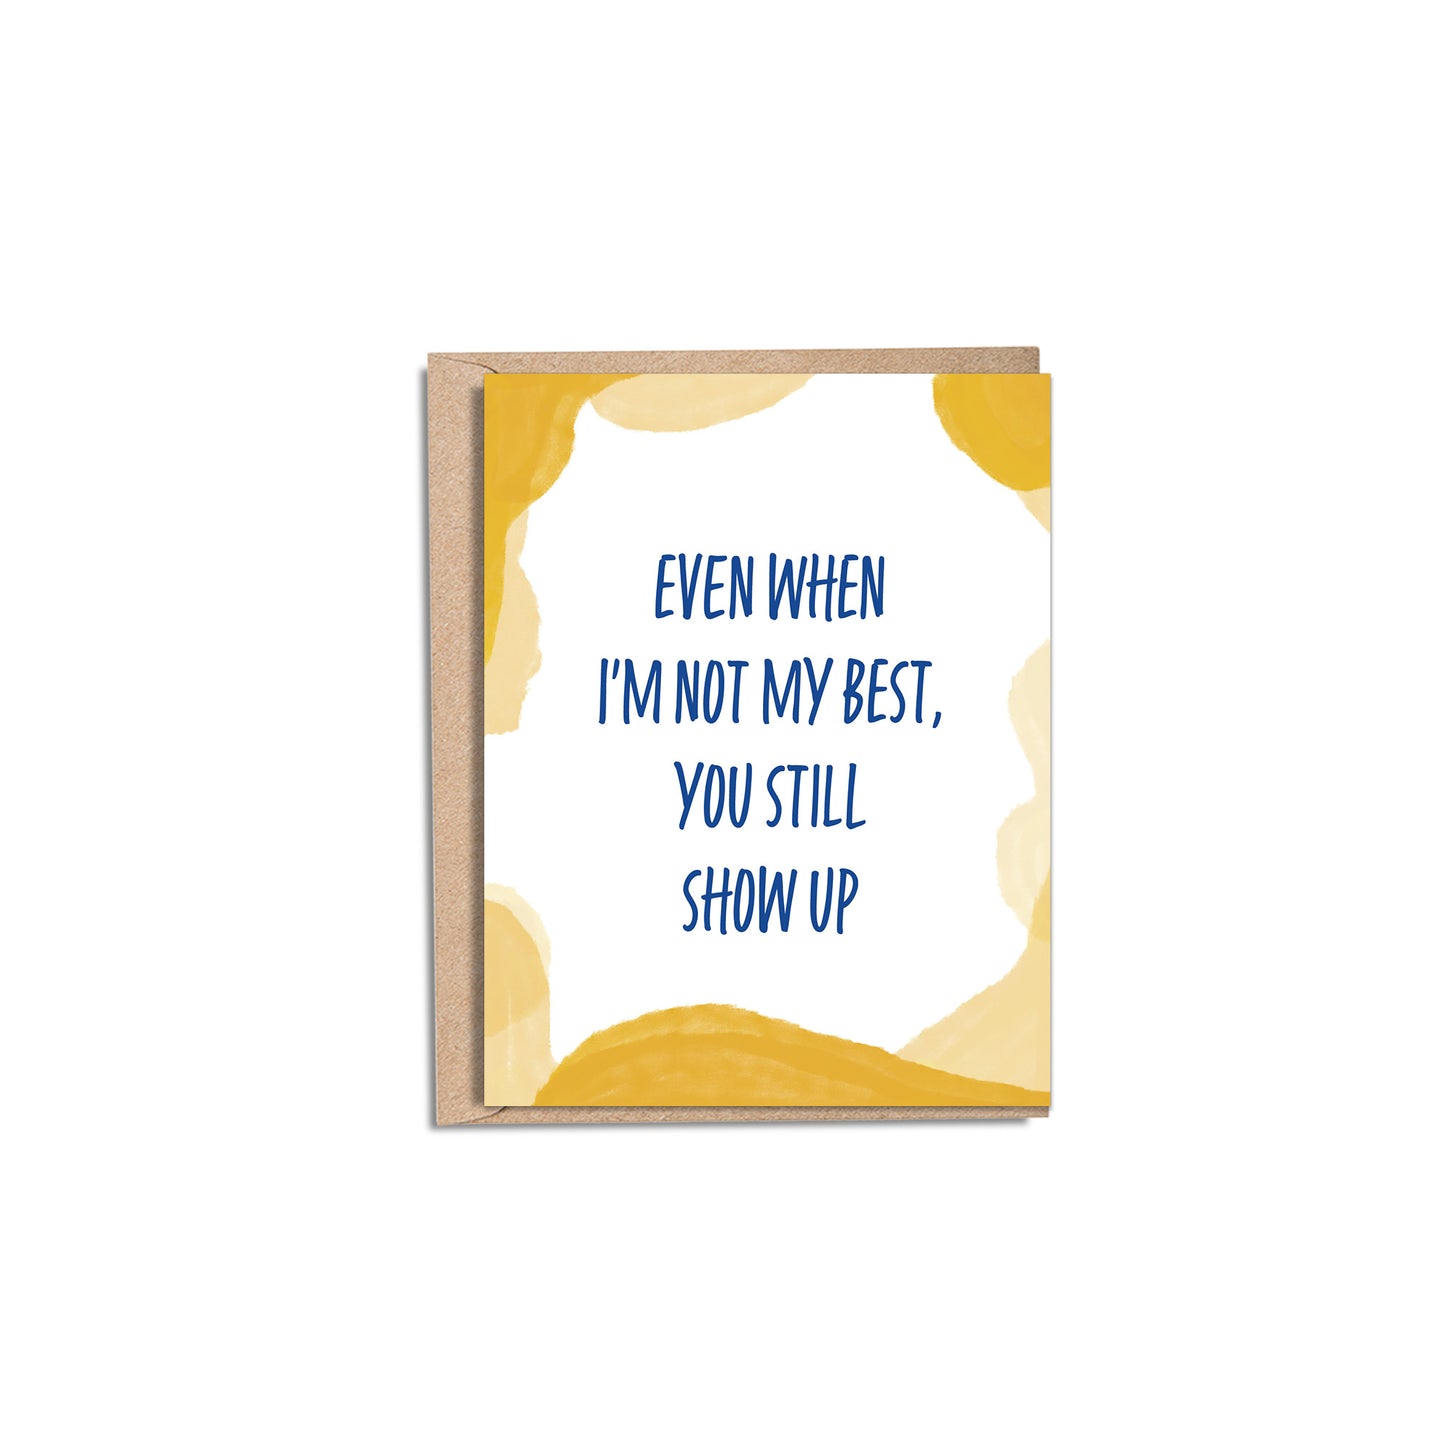 You Showed Up 4.25x5.5” A2 Thank you, celebrate, friendship, gratitude, support greeting cards from Goods Made By Digitrillnana, Ashley Fletcher. Black Woman Owned. Perfect card to say thank you to a friend!